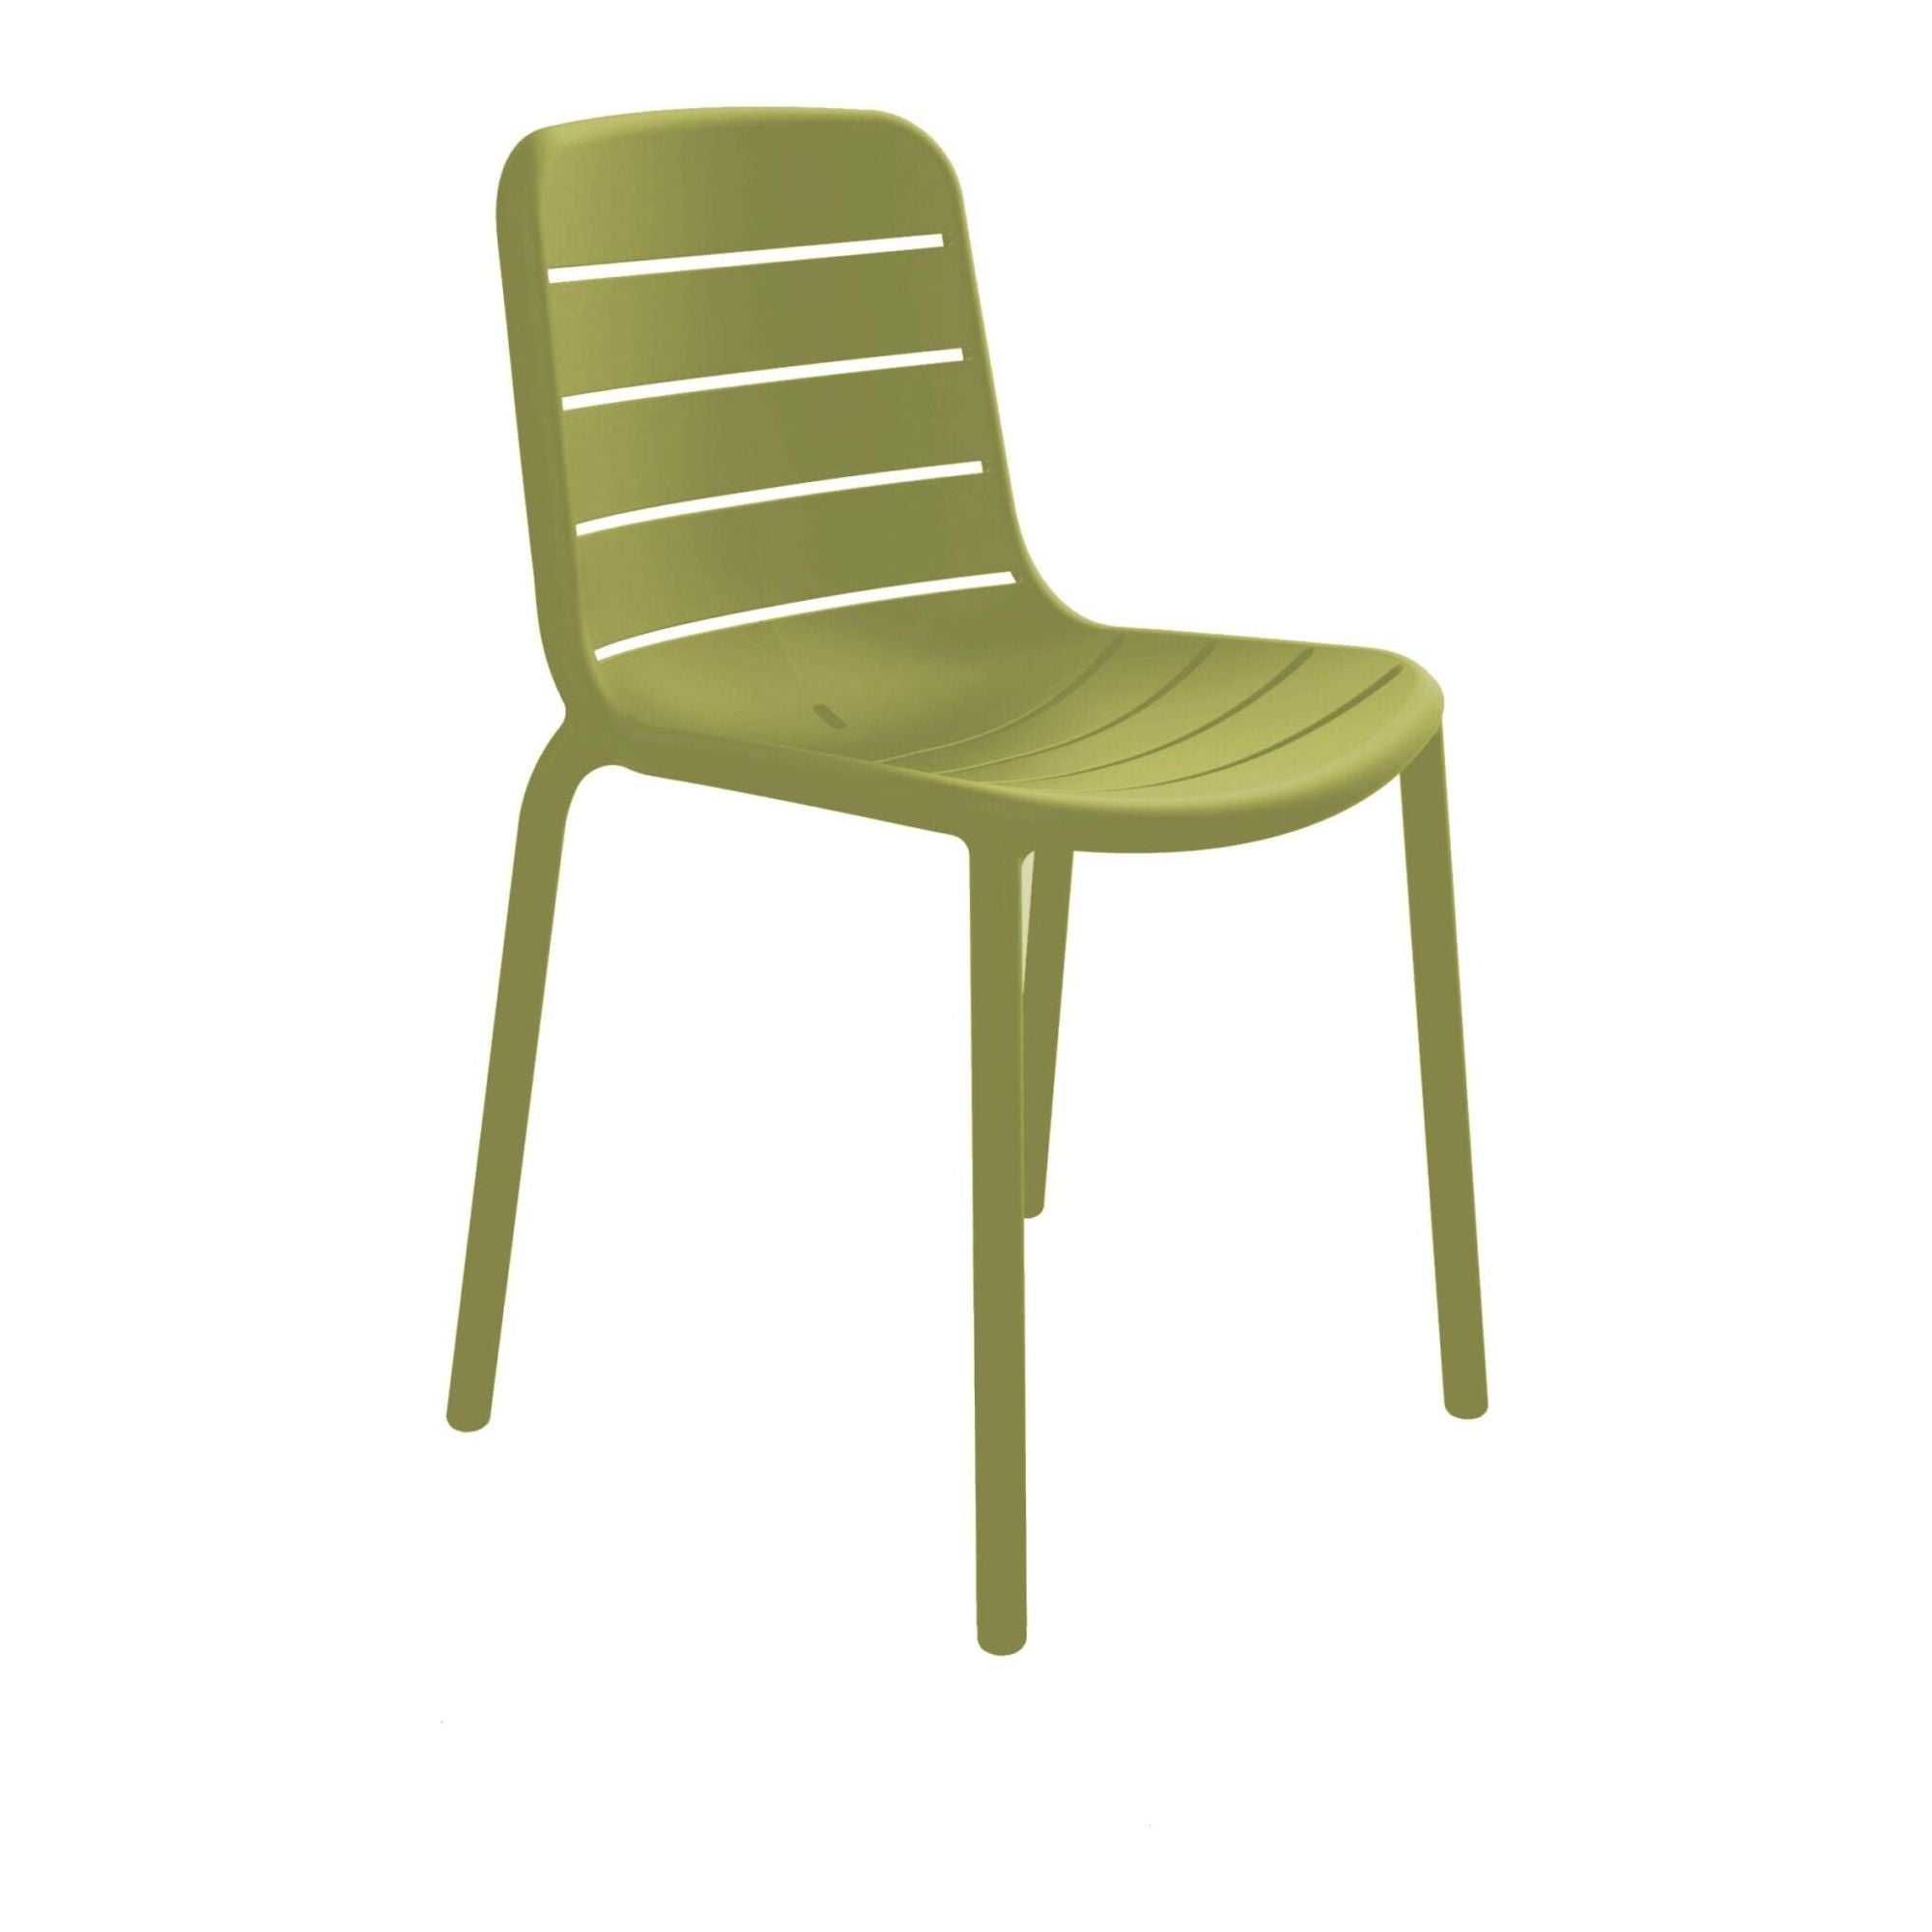 Resol gina chair indoors, outdoor olive green